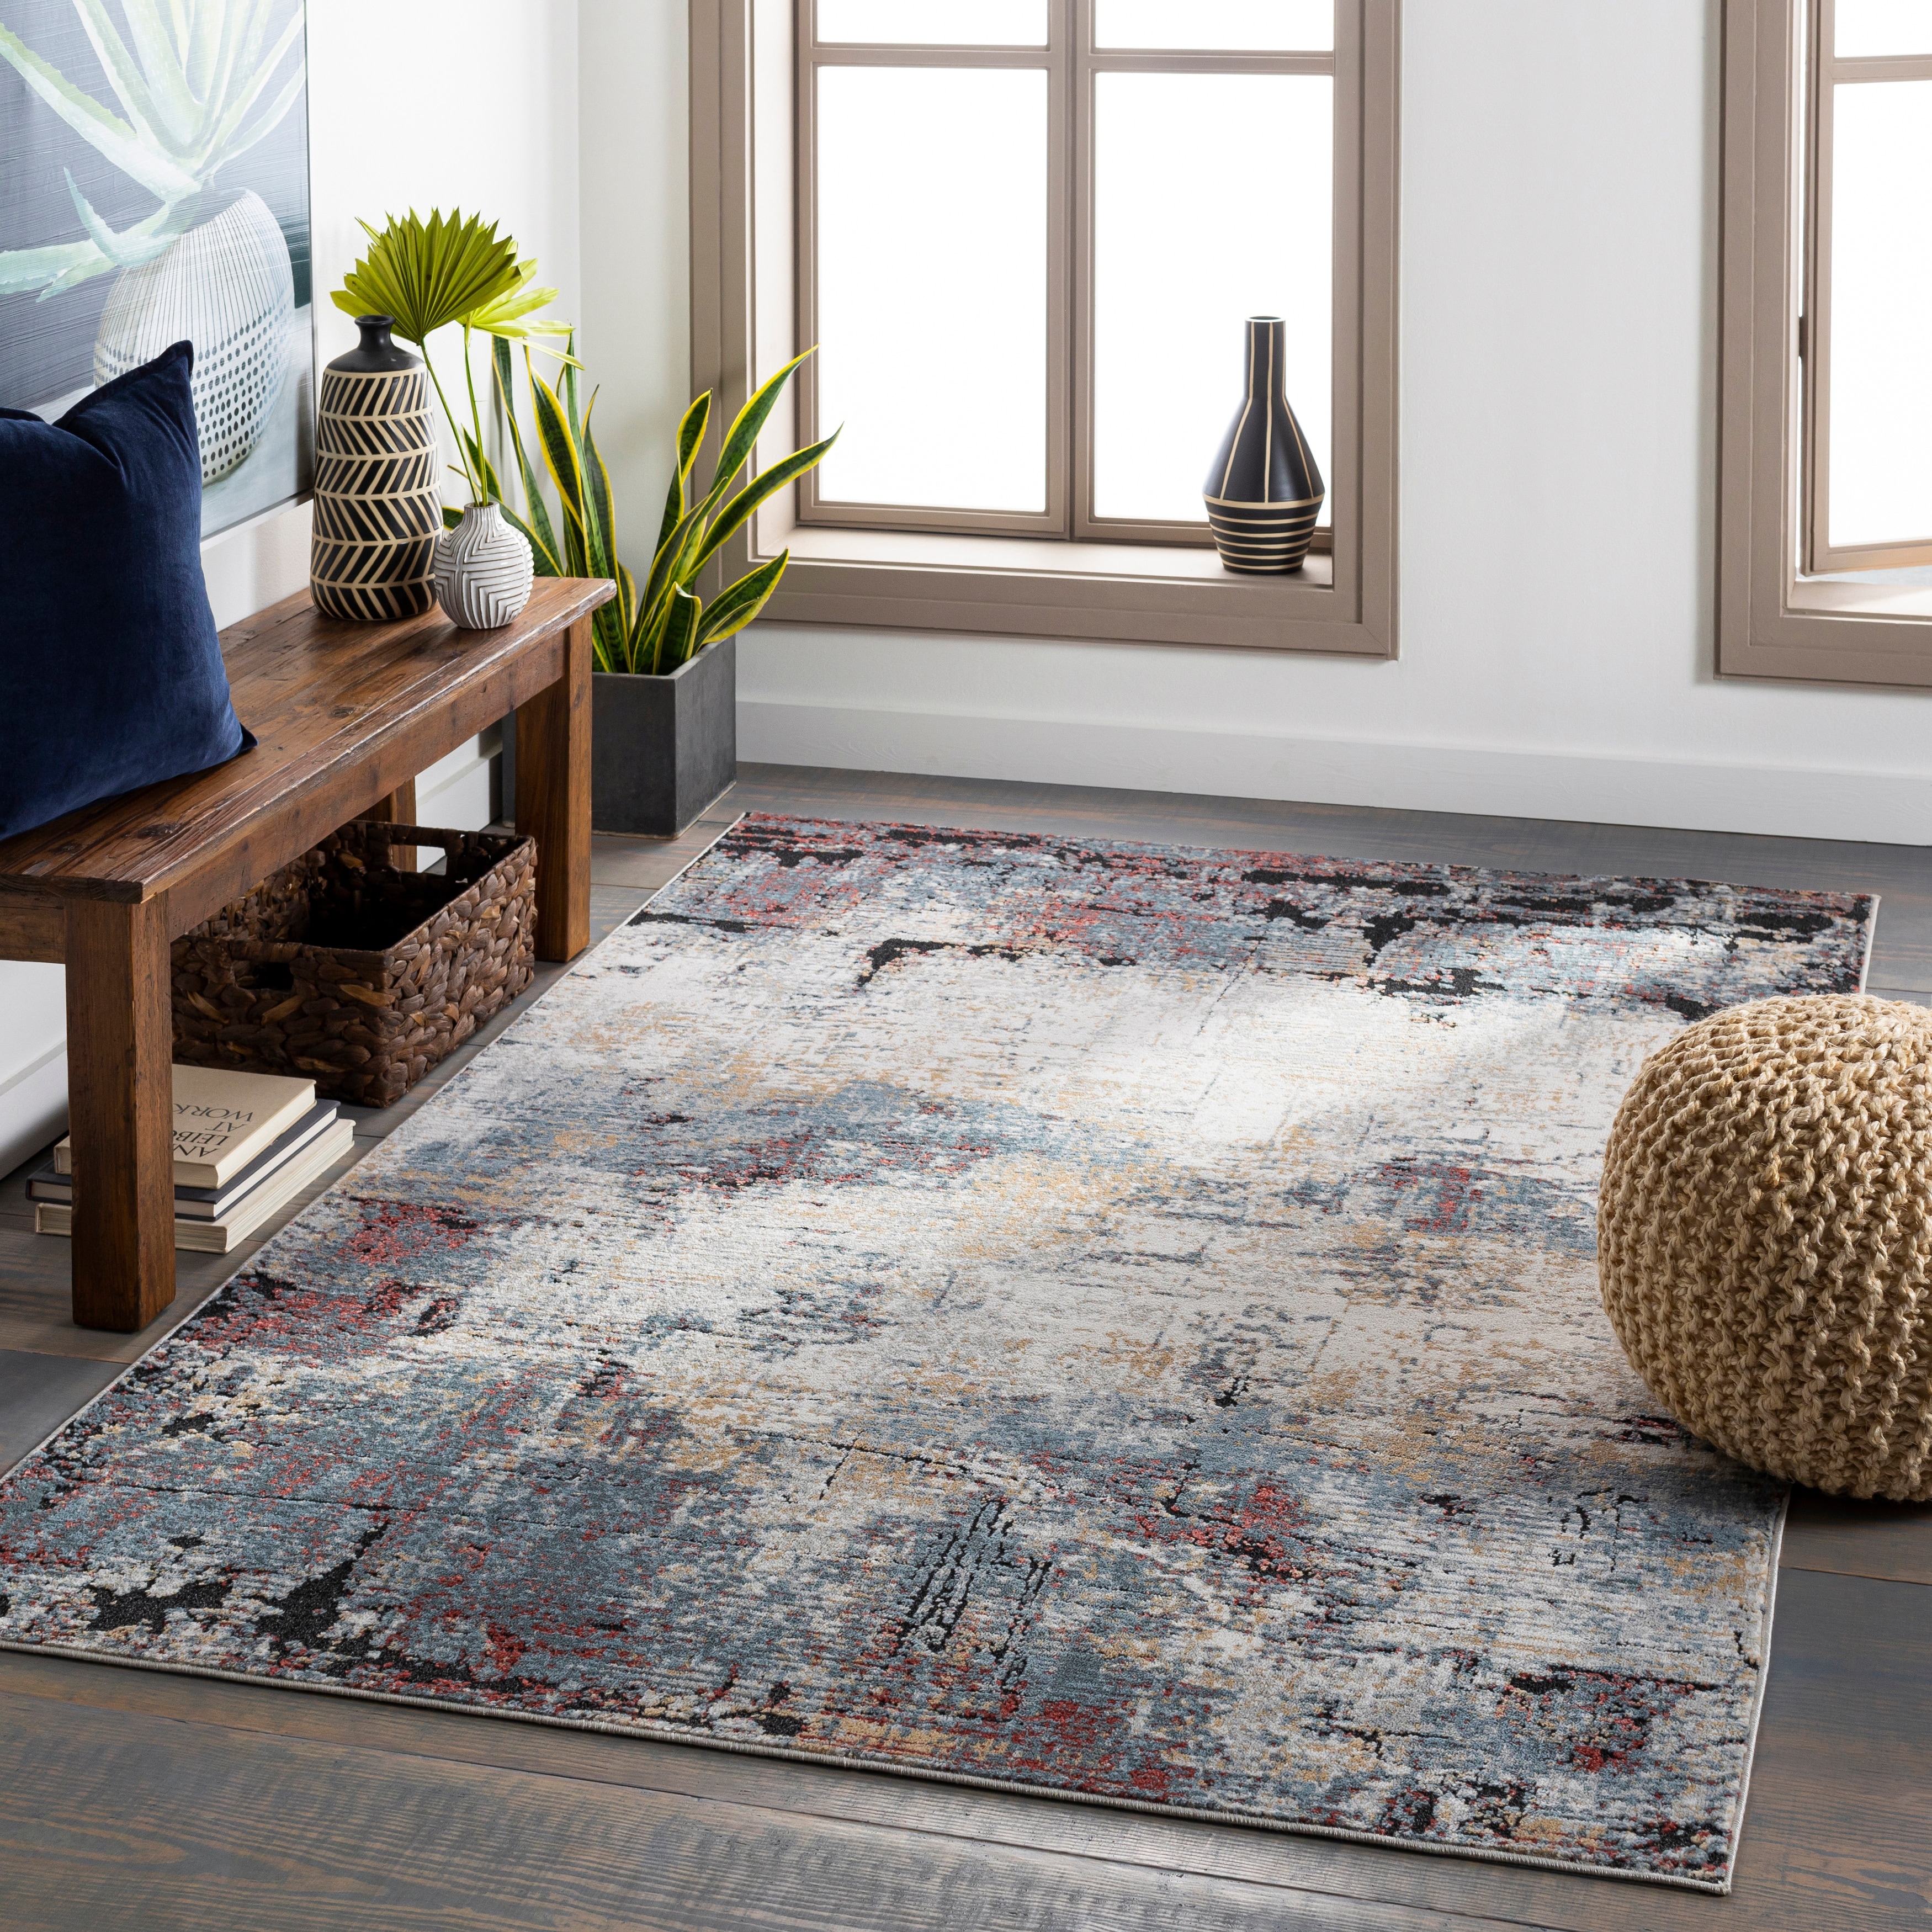 https://ak1.ostkcdn.com/images/products/is/images/direct/735a2afa10513721232a313d1acfdfcd80432a5f/Zayn-Modern-Industrial-Area-Rug.jpg